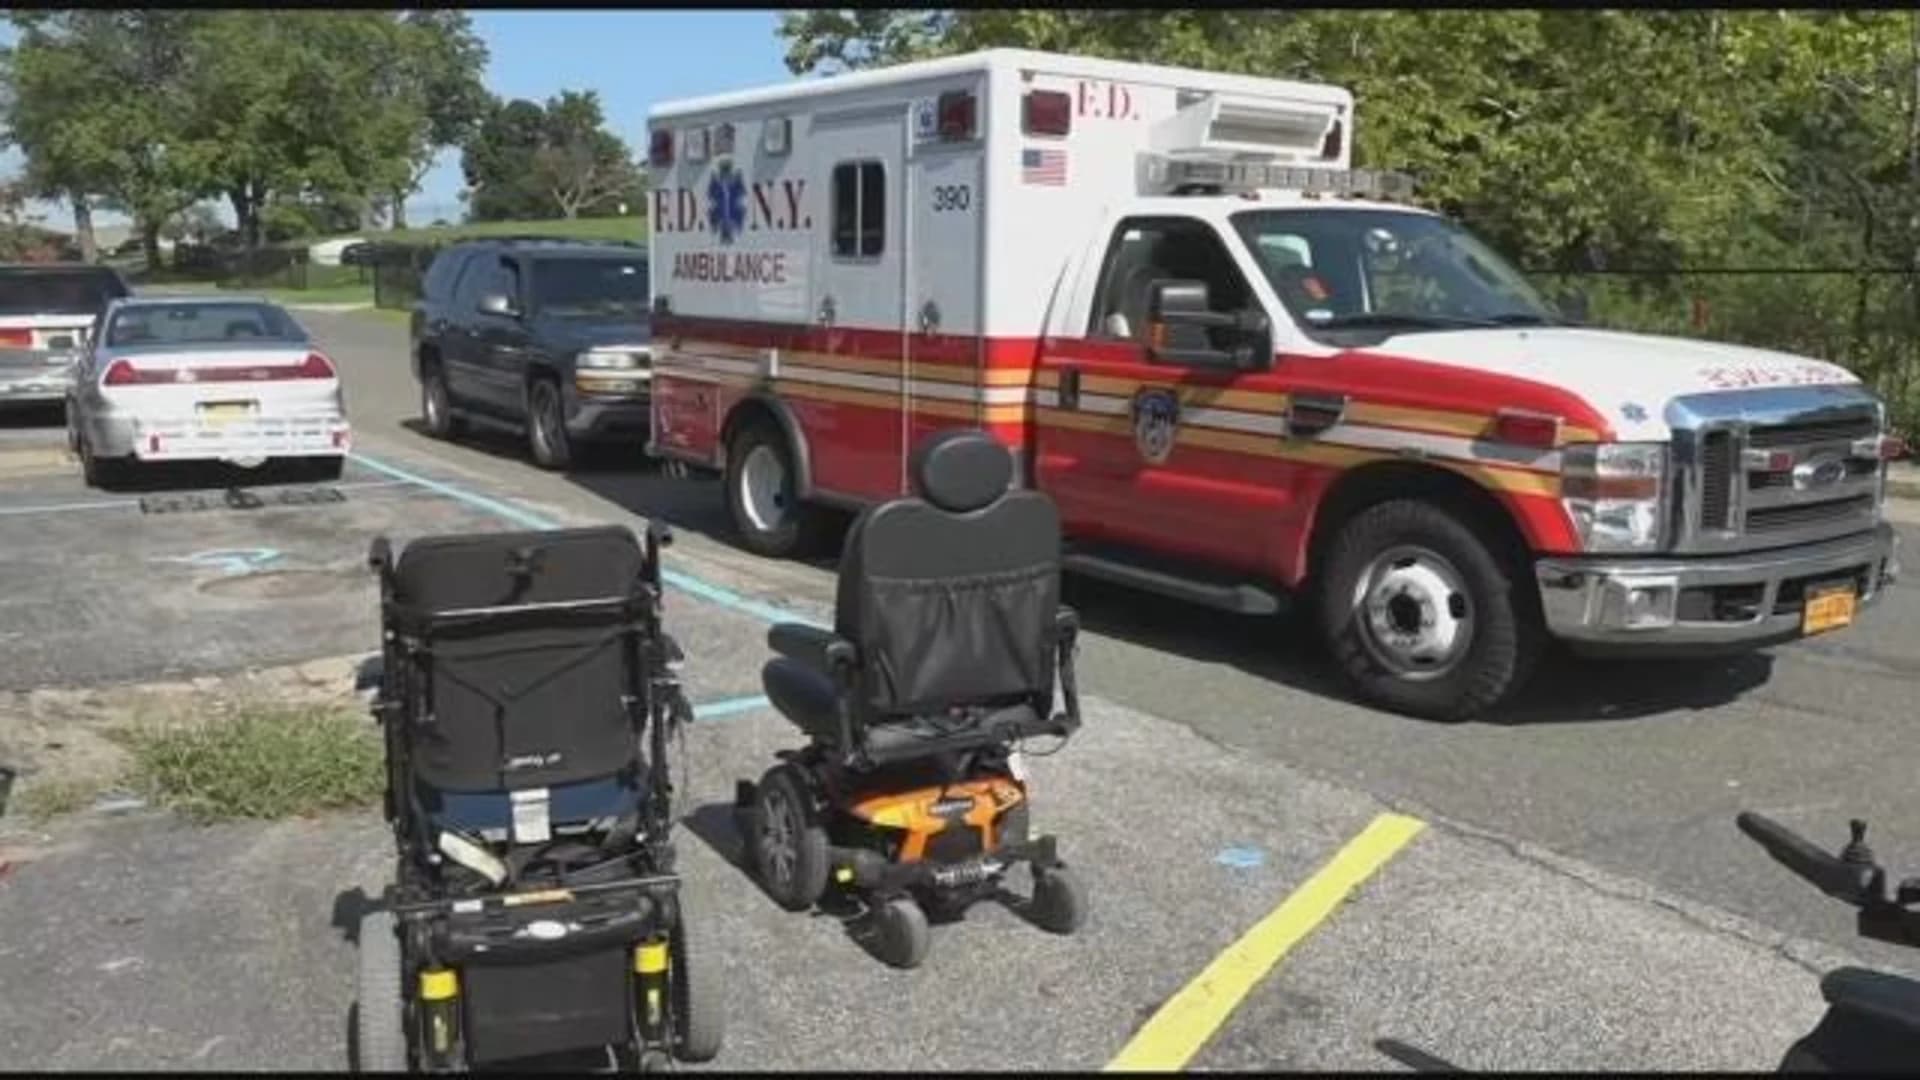 New ambulances can transport motorized wheelchairs for patients